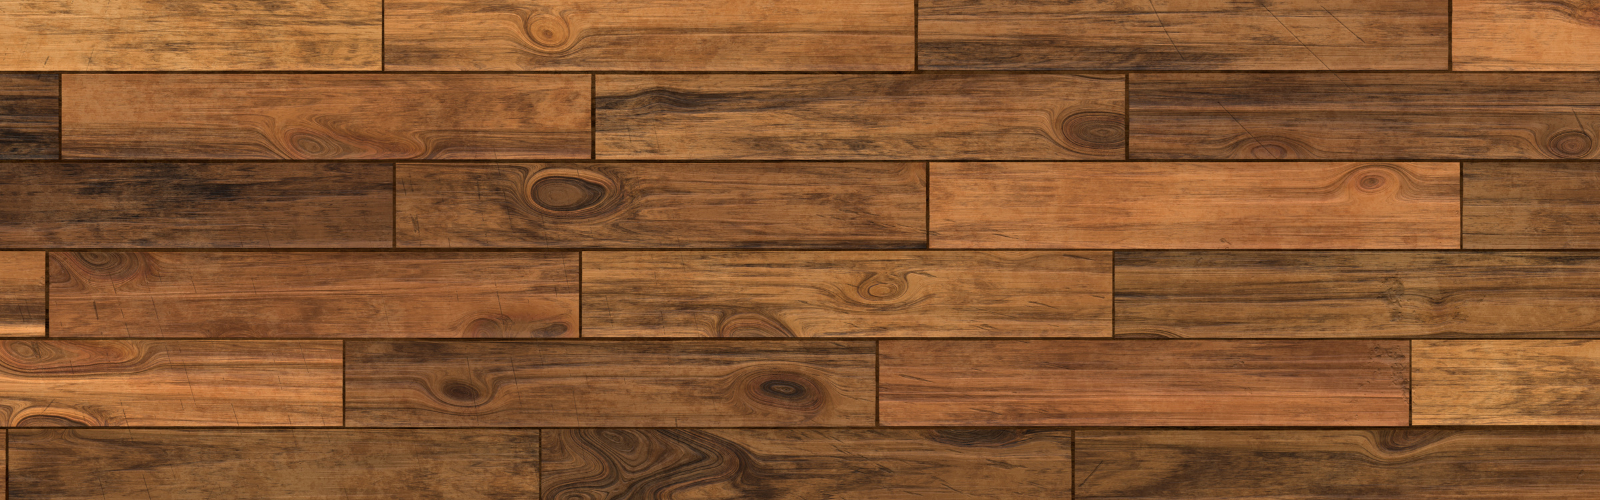 Laminate flooring vs hardwood, which is best for my home?